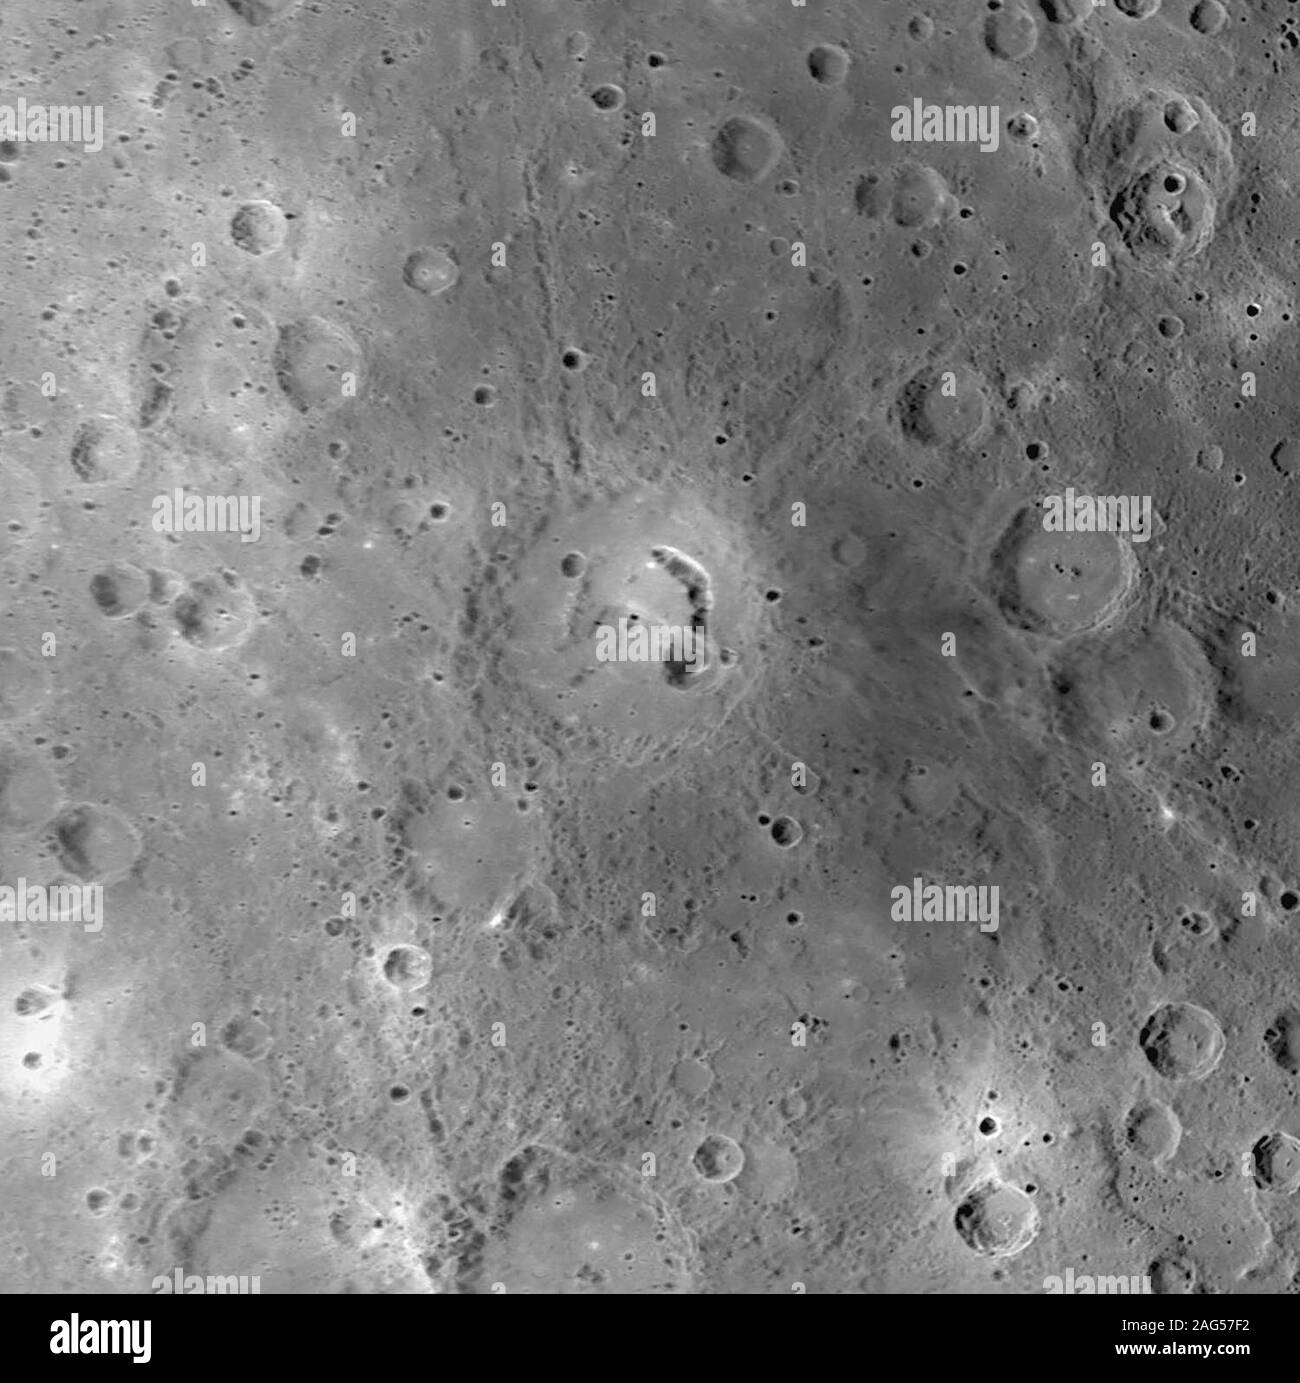 This crater, first imaged during MESSENGER's third Mercury flyby, has drawn scientific attention because of the large, arc-shaped pit located on the eastern side of its floor. Similar pits have been discovered on the floors of several other Mercury craters, such as Beckett and Gibran. These pits are postulated to have formed when subsurface magma subsided or drained, causing the surface to collapse into the resulting void. If this interpretation is correct, pit-floor craters such as Picasso provide evidence of shallow magmatic activity in Mercury's history. Stock Photo